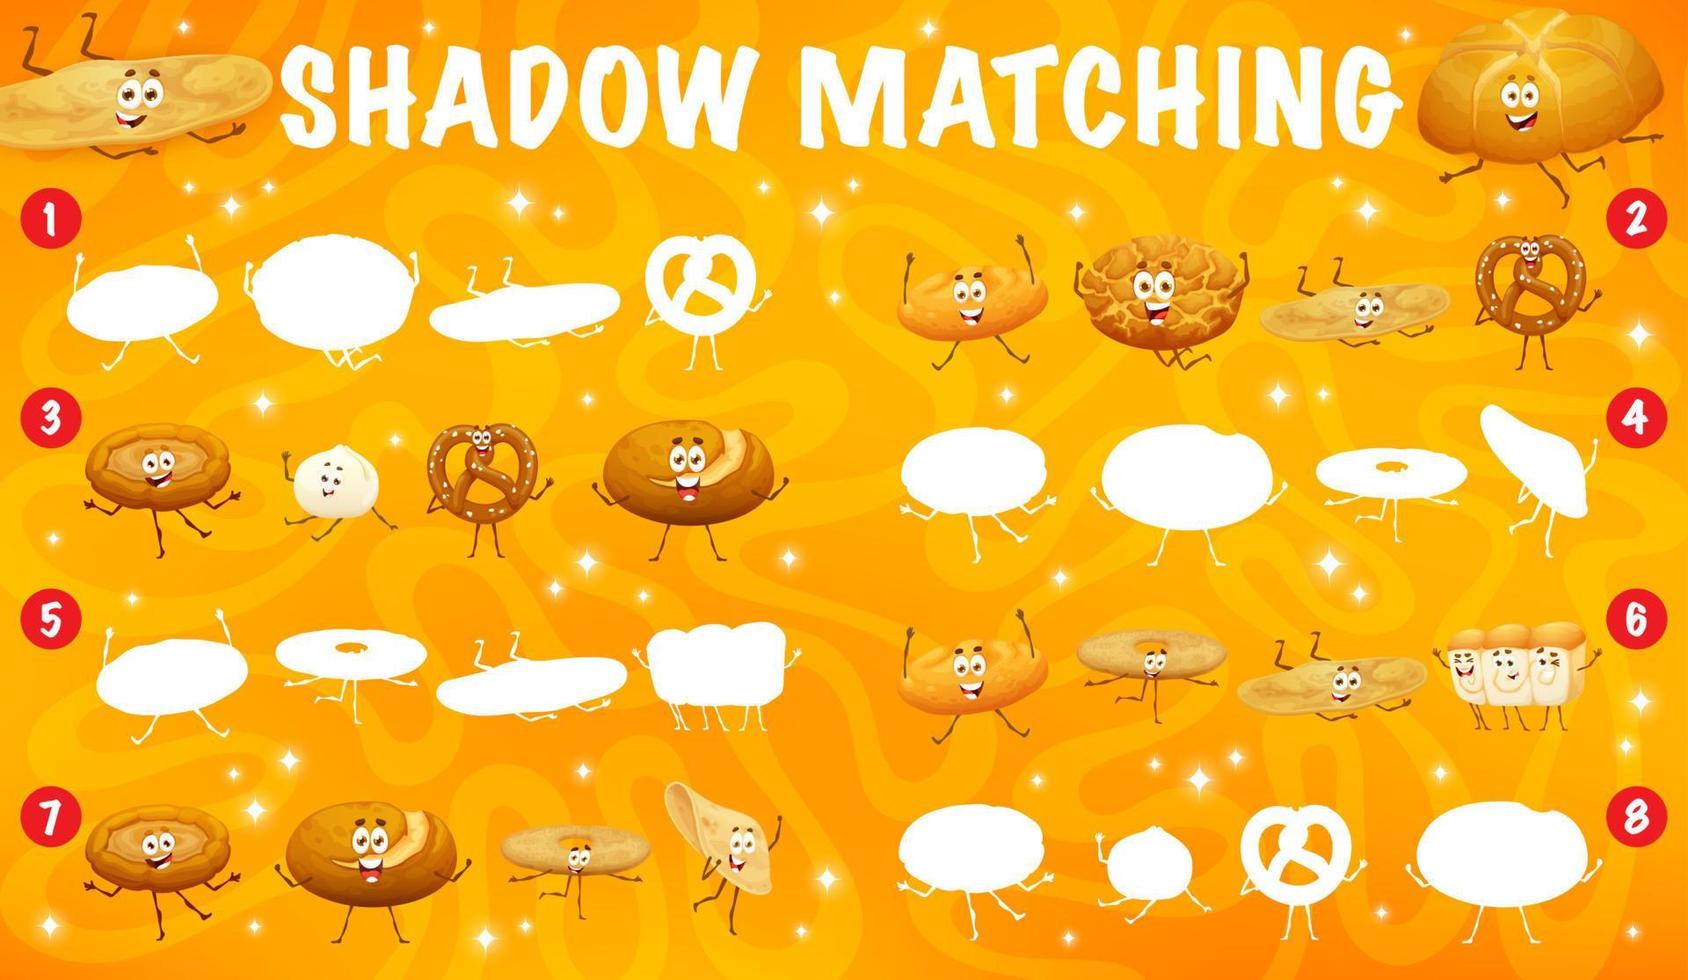 Shadow matching game with cartoon bread characters vector